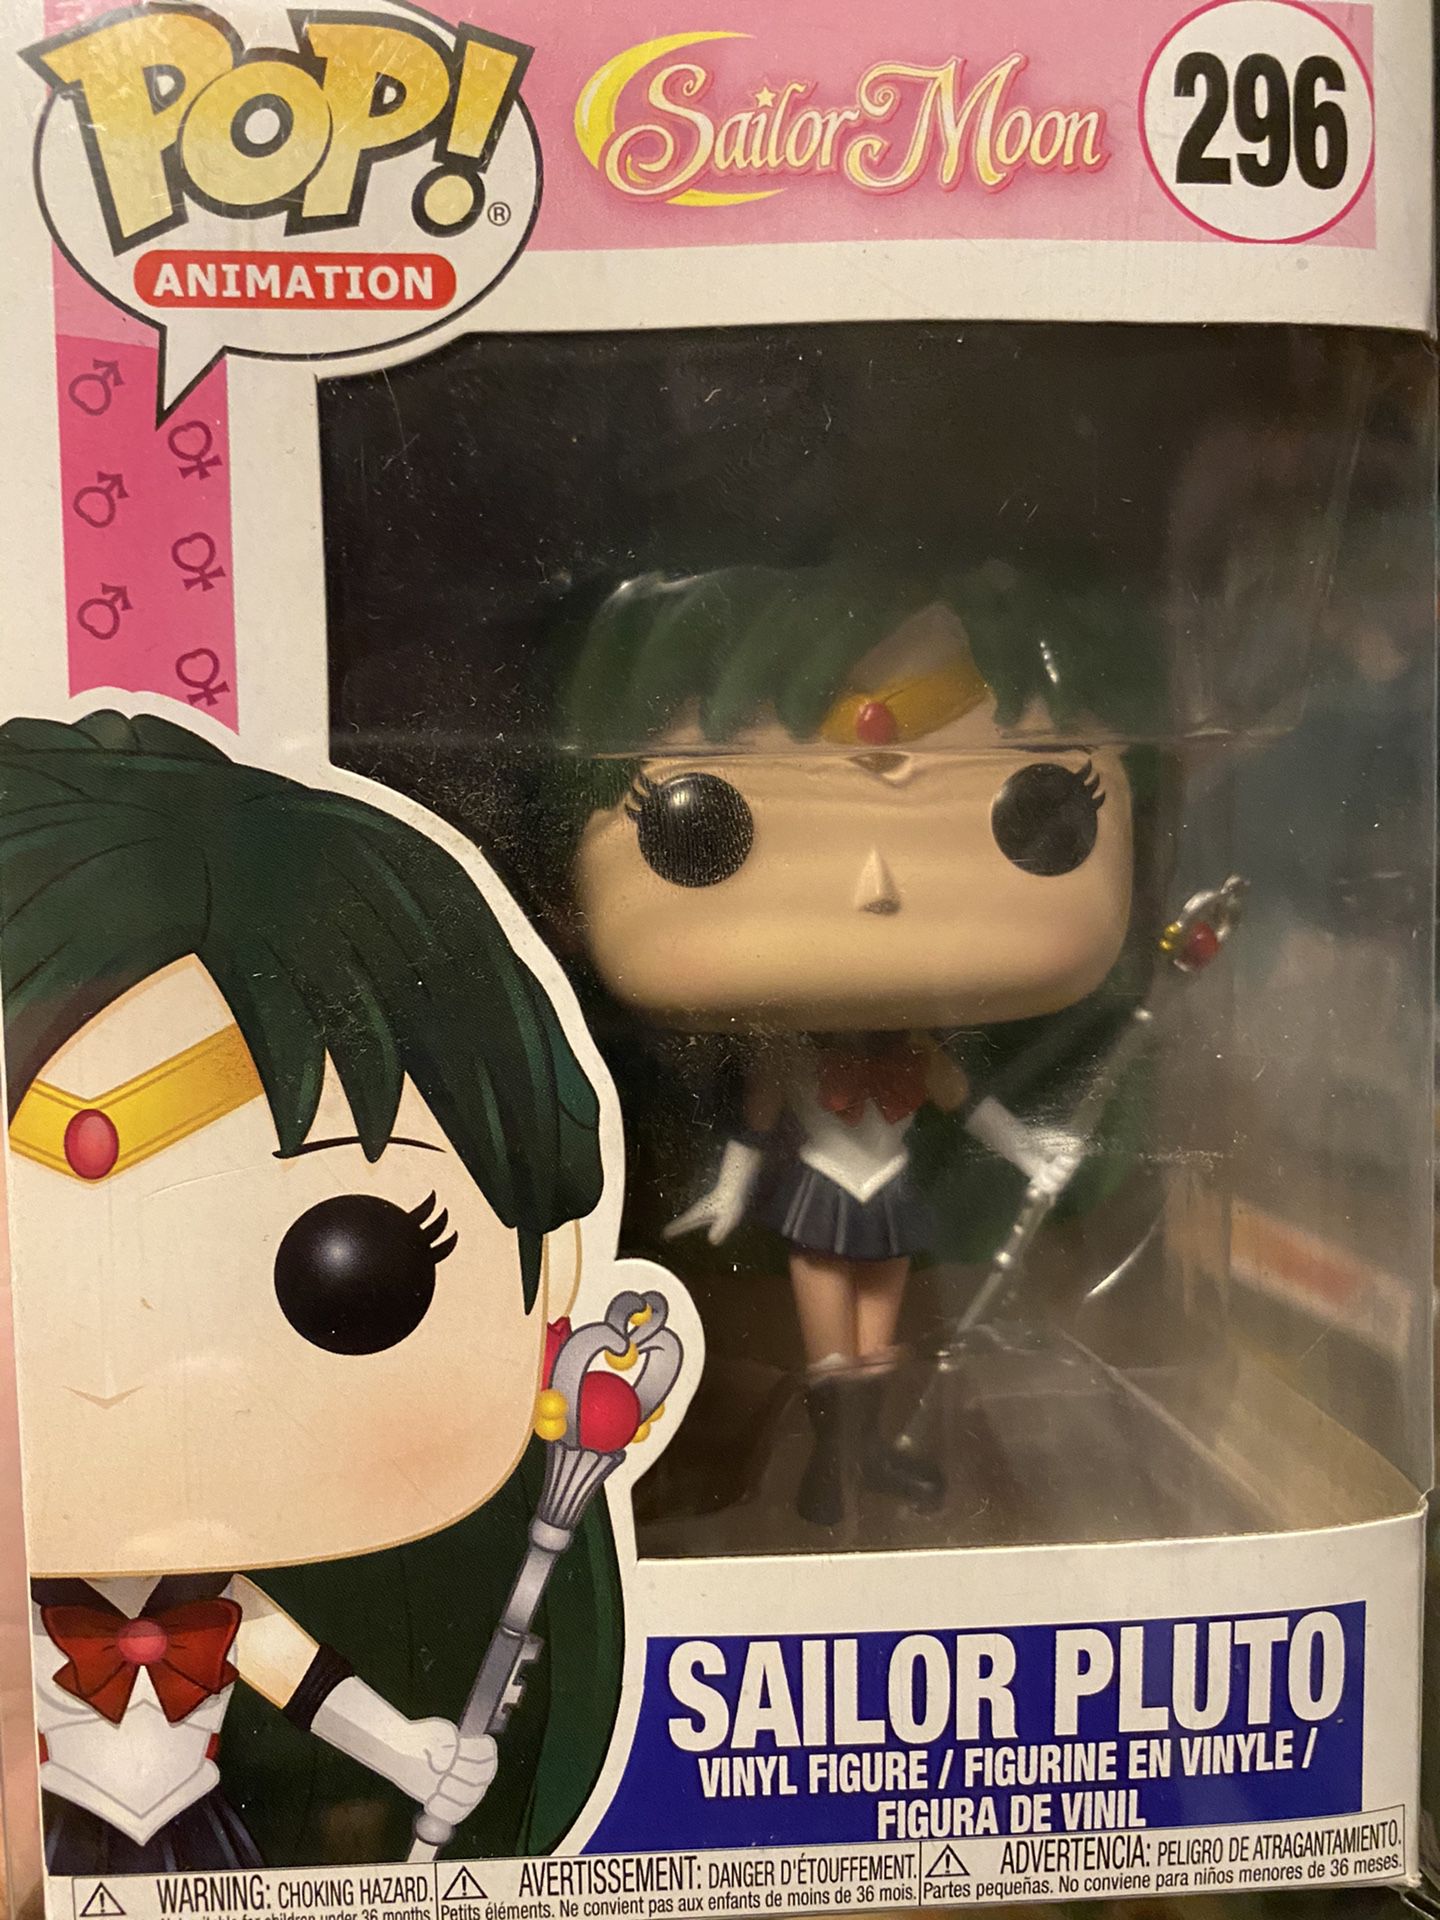 Funko Pop! Sailor Moons - #296 #91 #92 #93 and #295